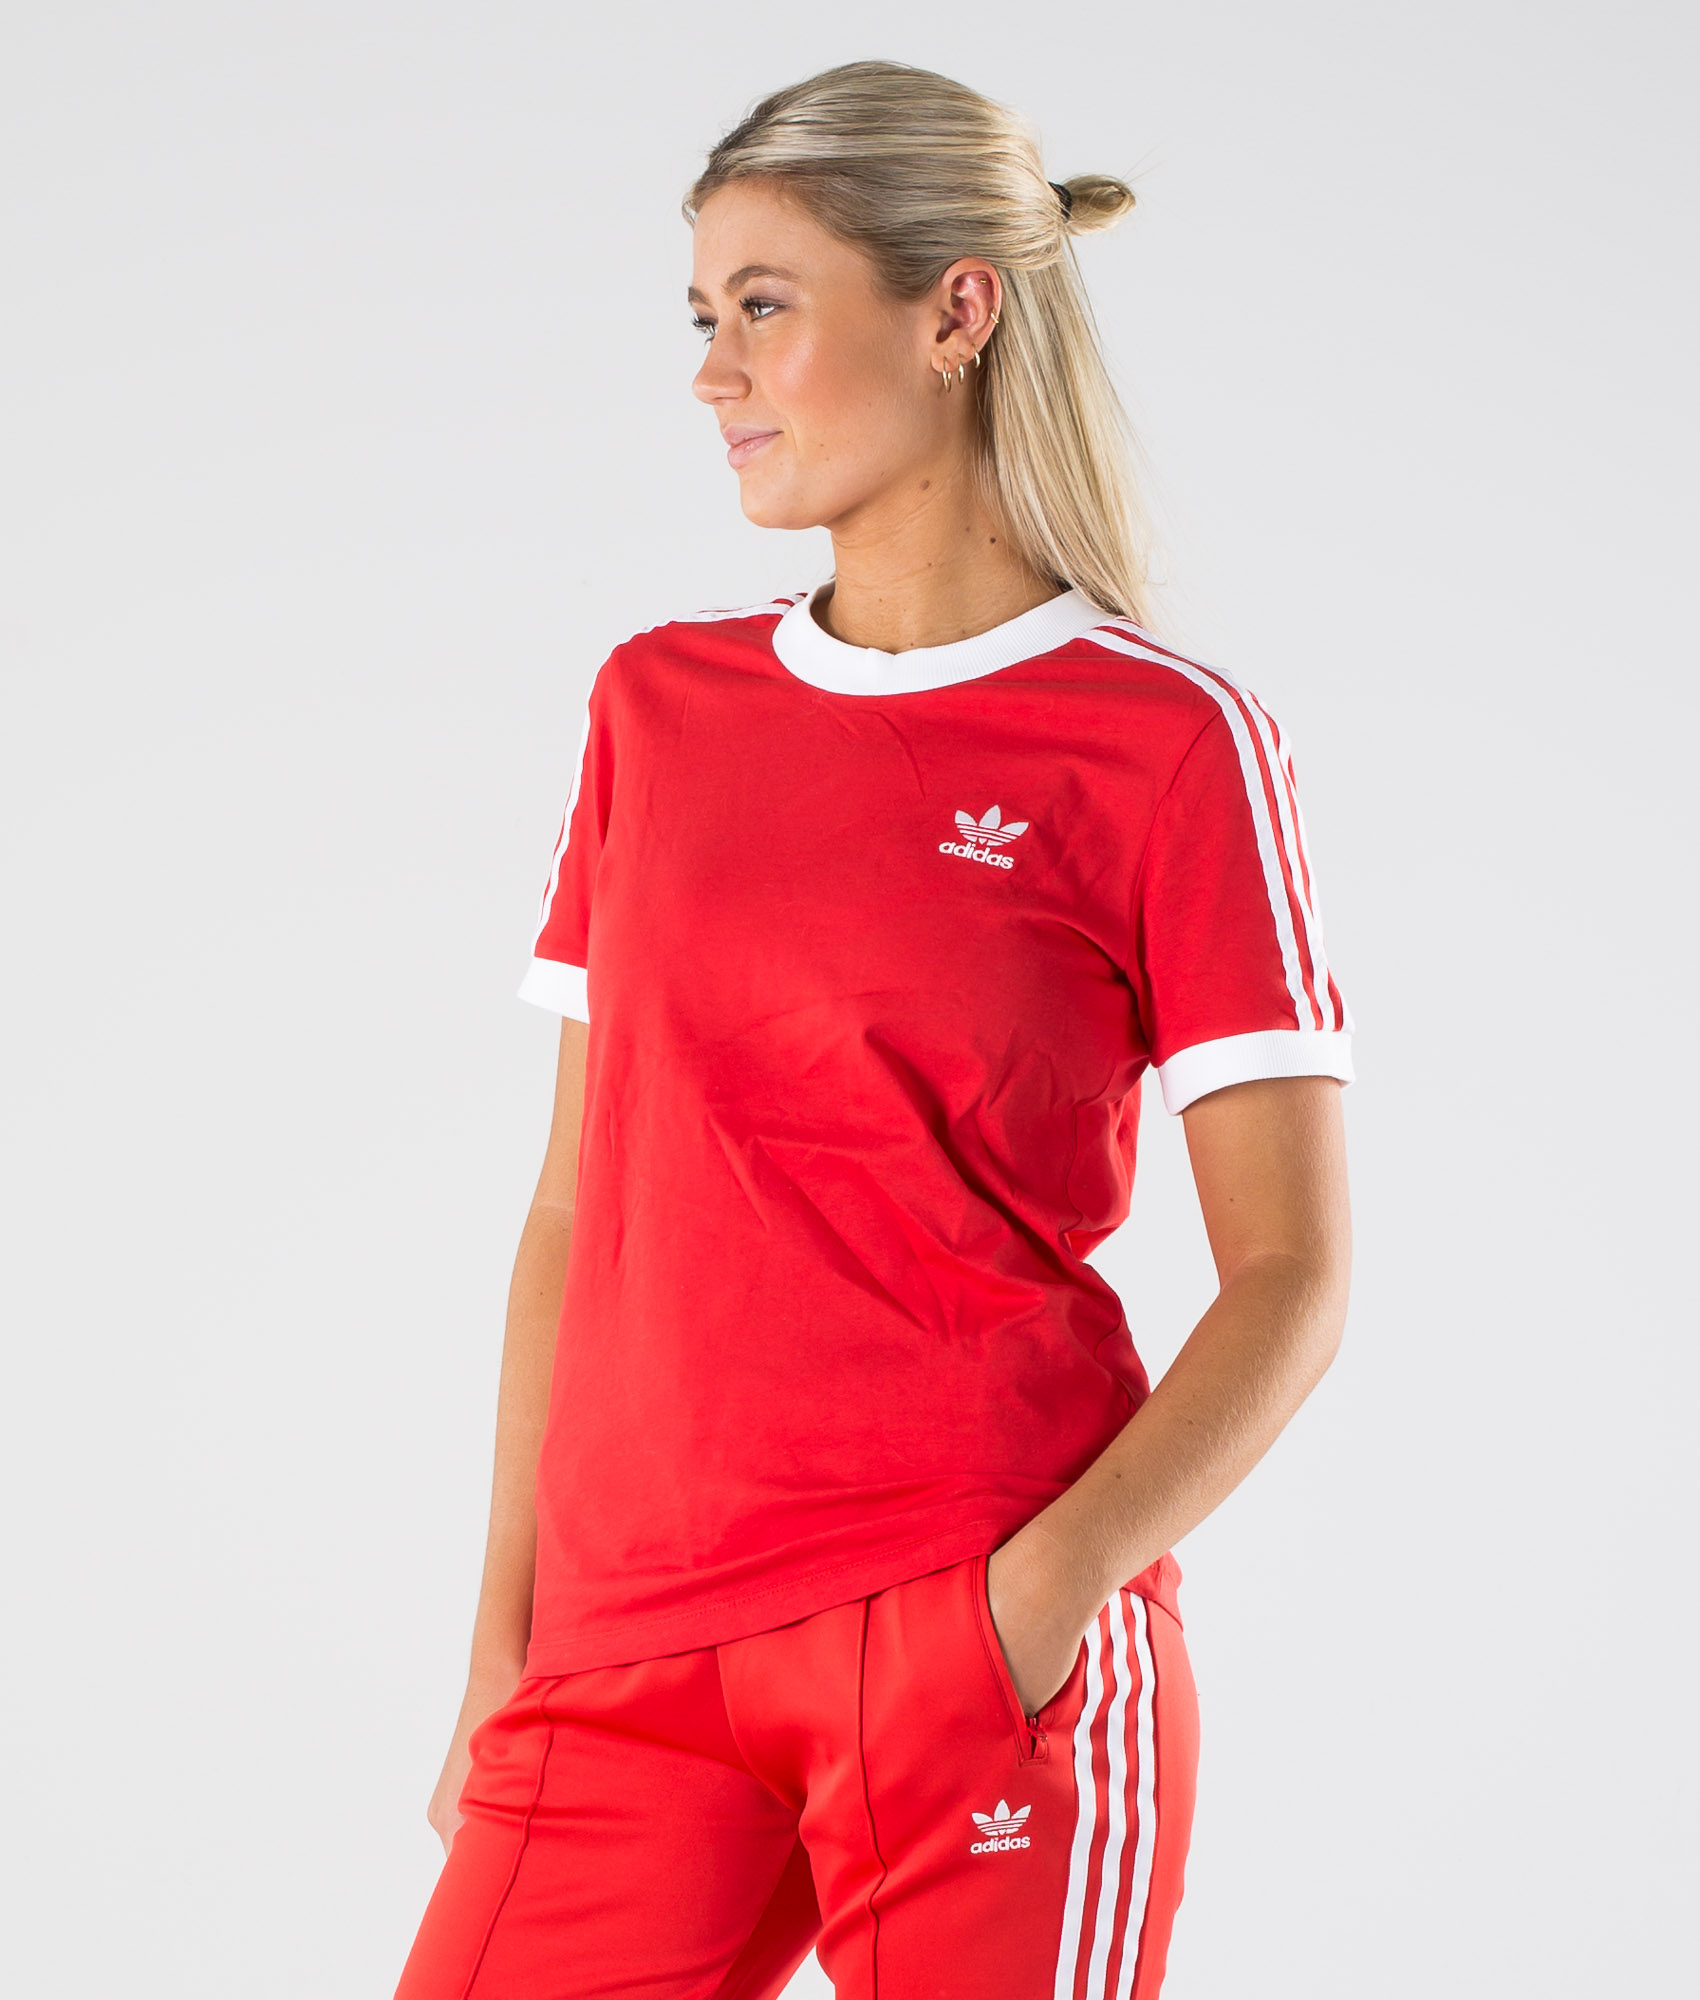 red adidas top womens